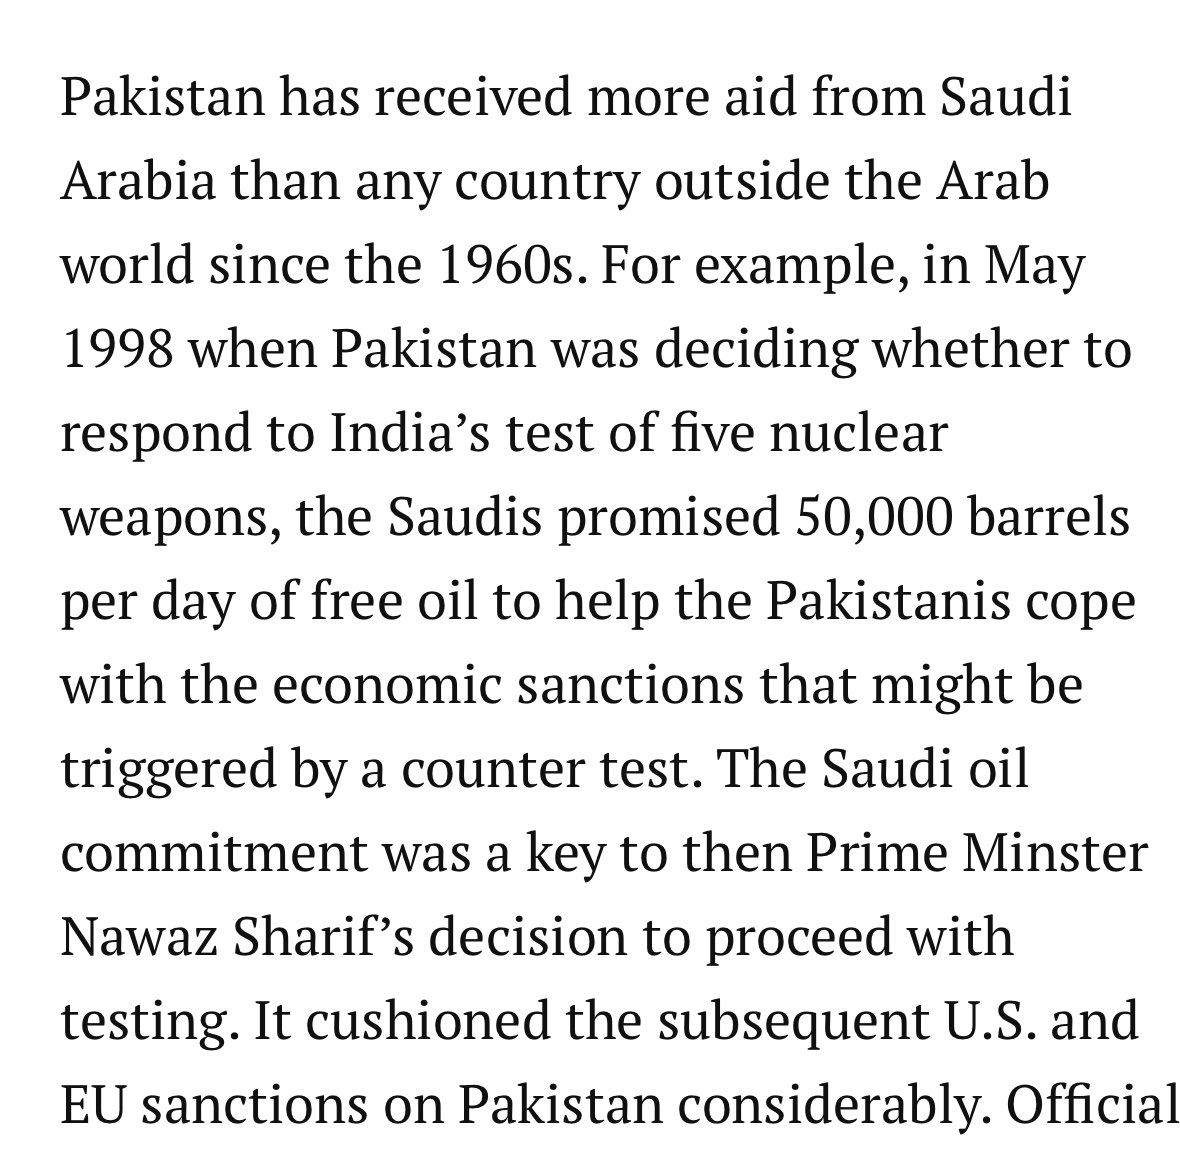 3) if the 1998 sanctions had not happened, what kind of relationship would Pakistan have today with Japan  (which was damaged by ‘98) and Saudi Arabia  (which was deepened by ‘98)?